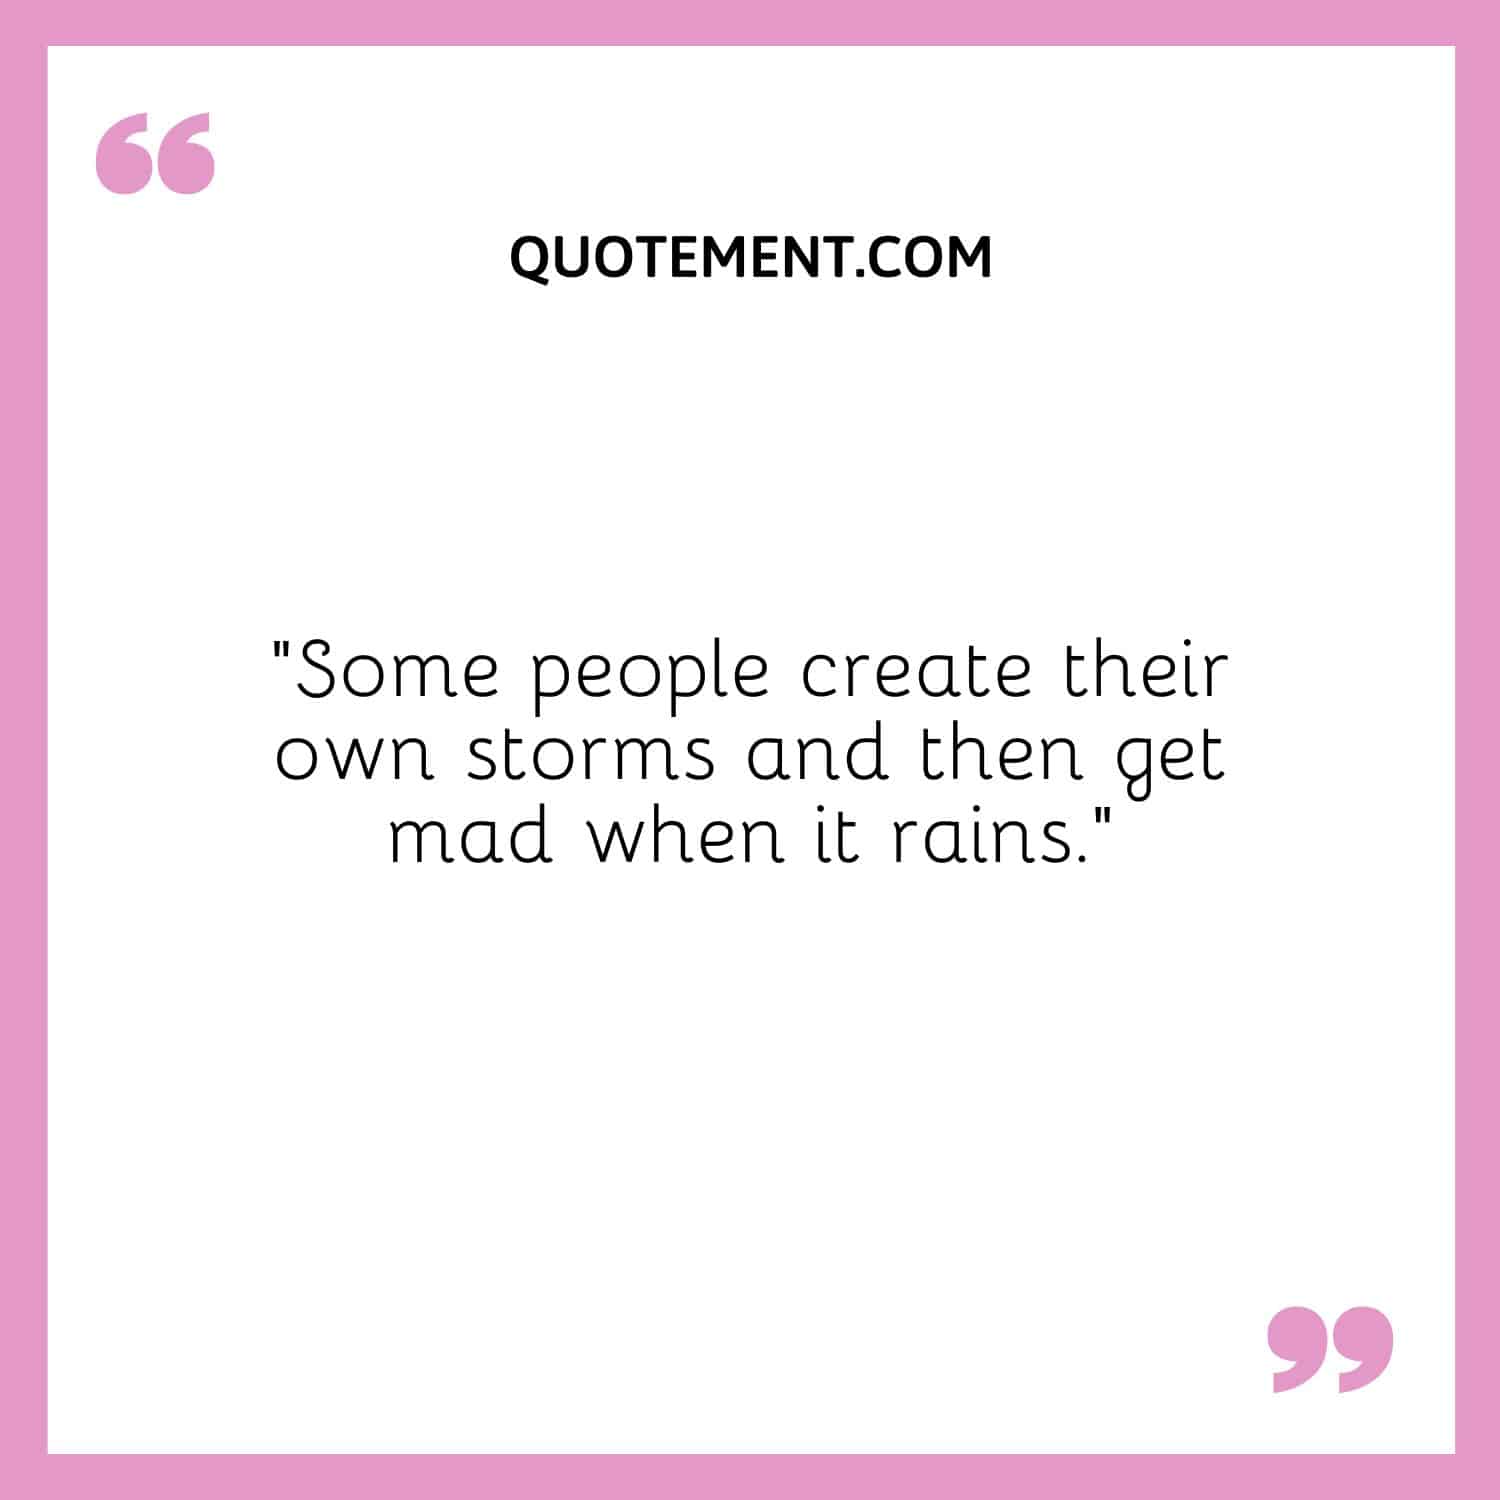 “Some people create their own storms and then get mad when it rains.”